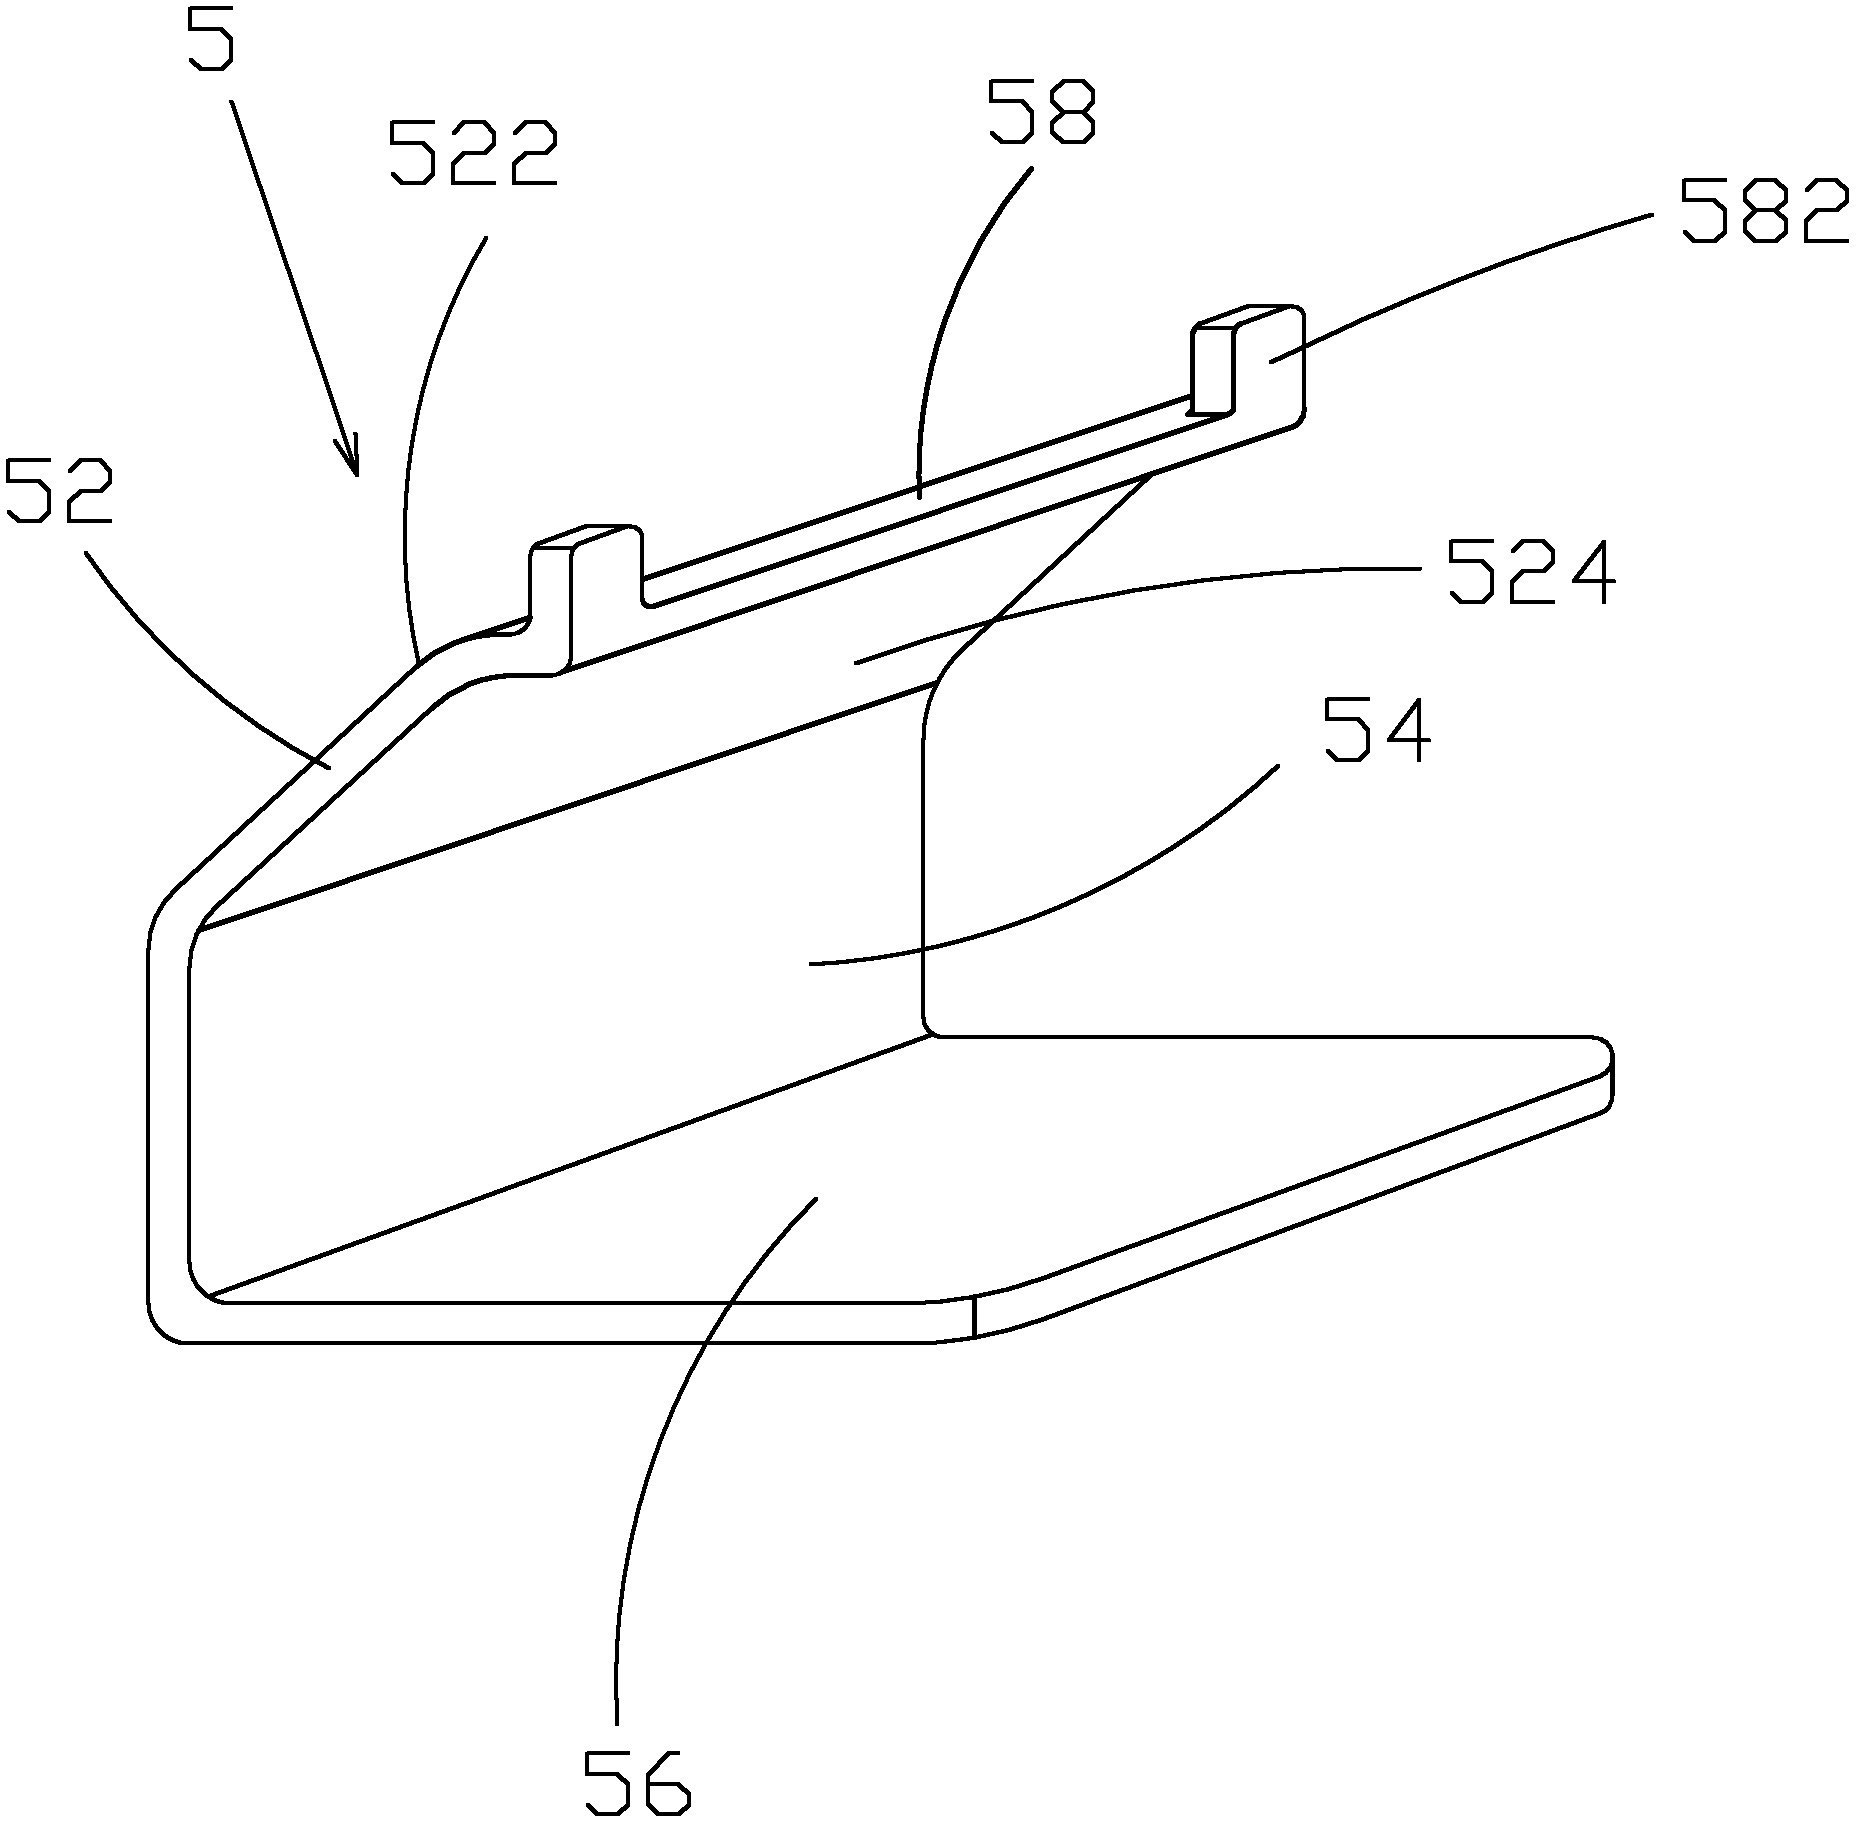 Backlight module of display device